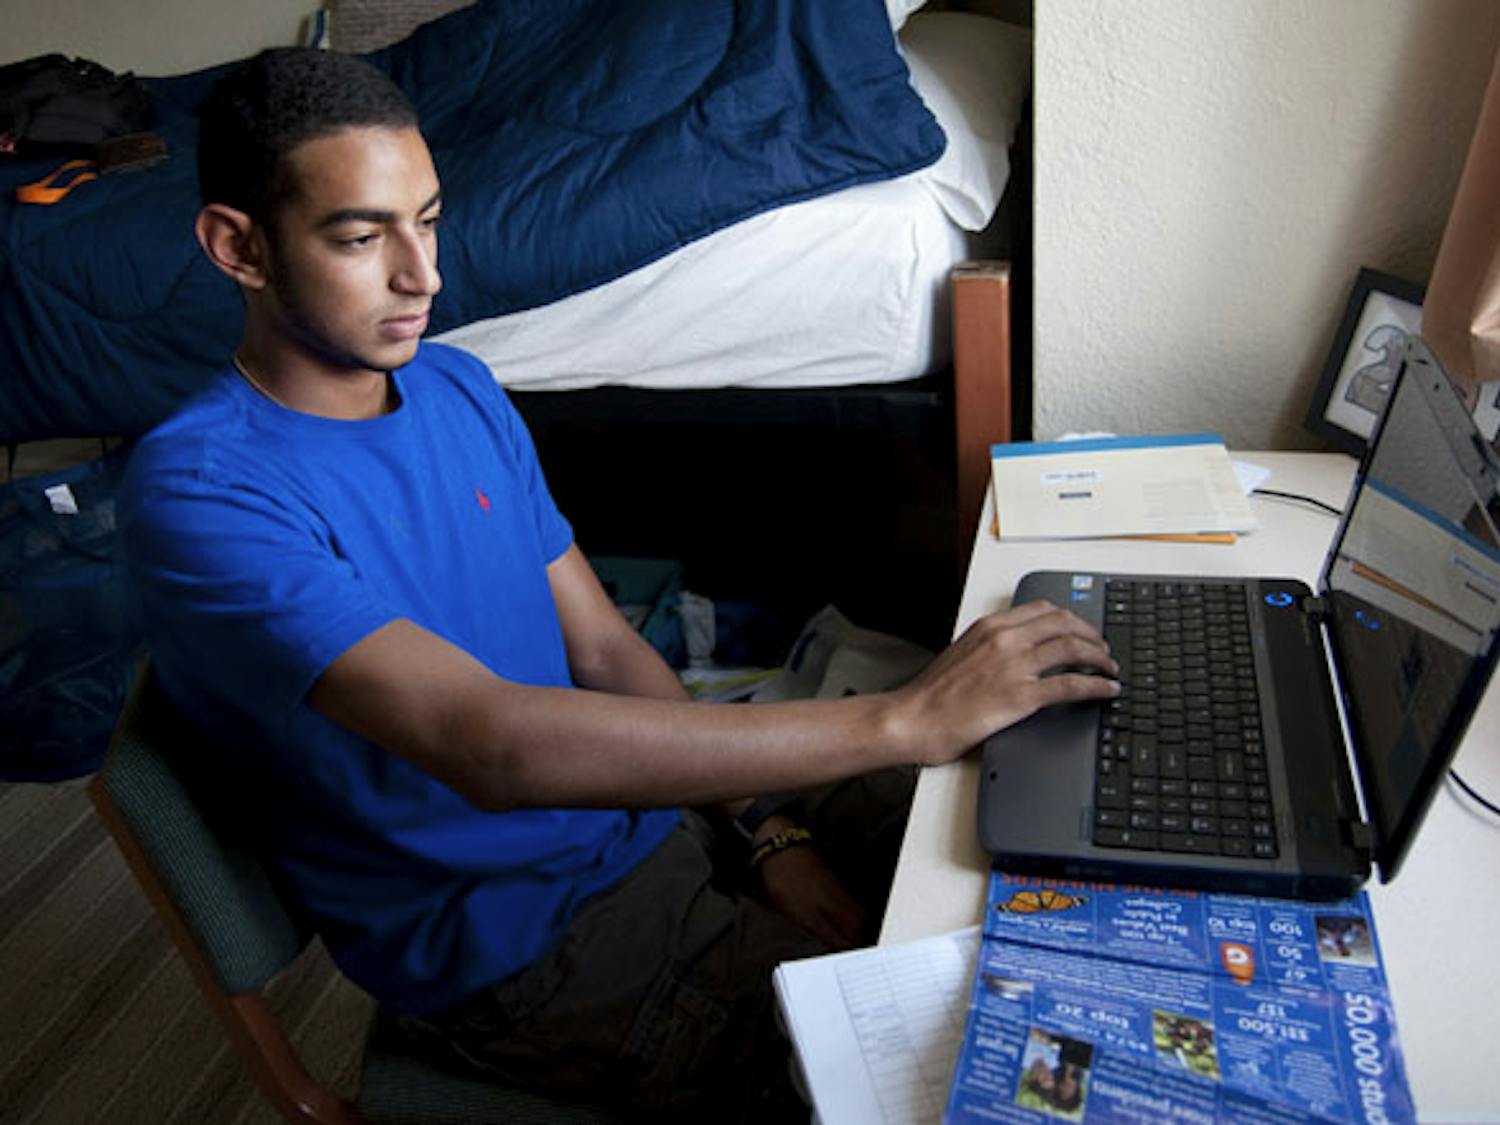 Freshman business major David Habib, 18, checks his schedule on his laptop in his dorm after his first day of classes for the fall semester.